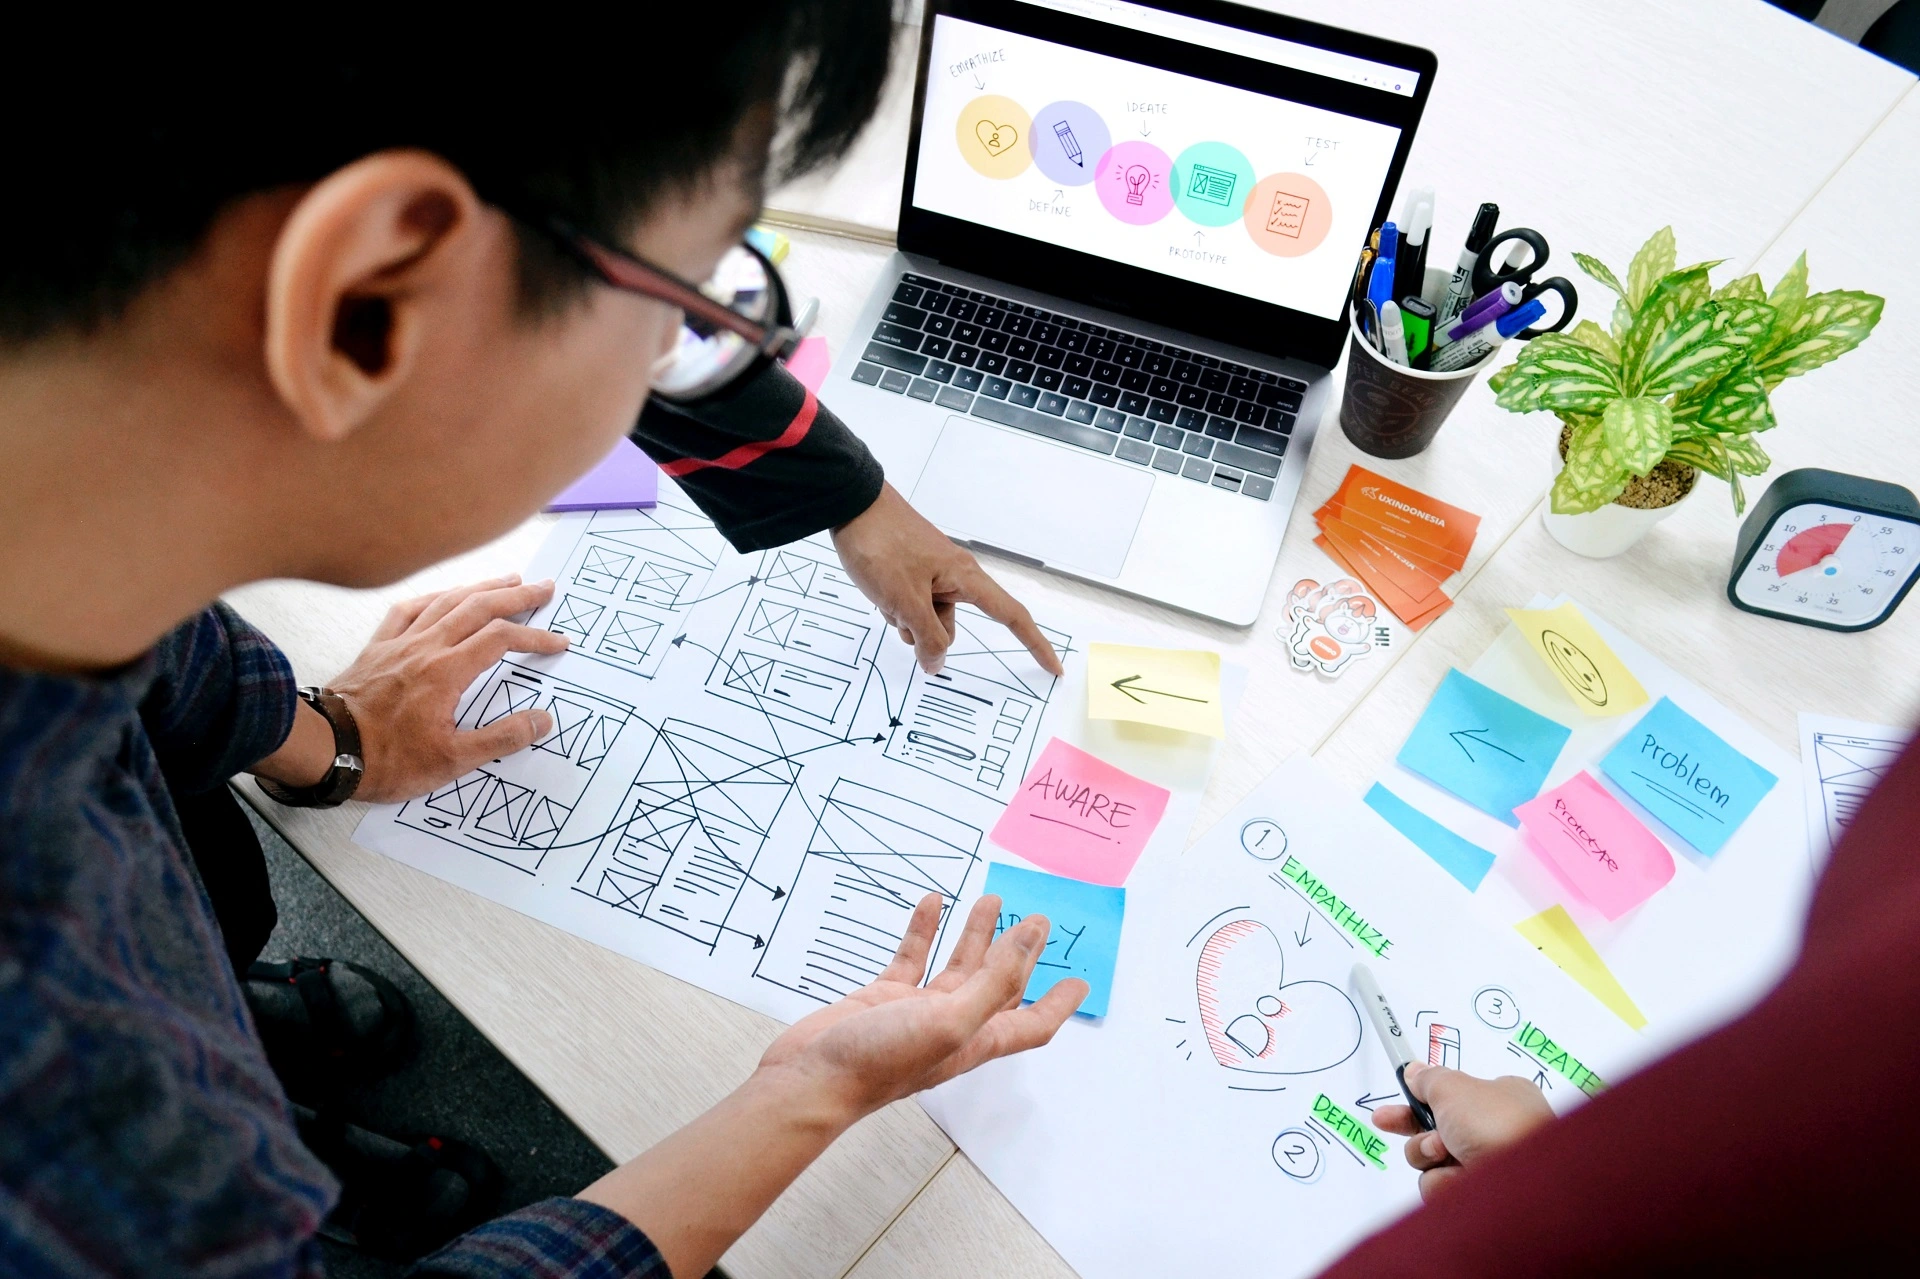 What are UI and UX Design? How important is it in software development?